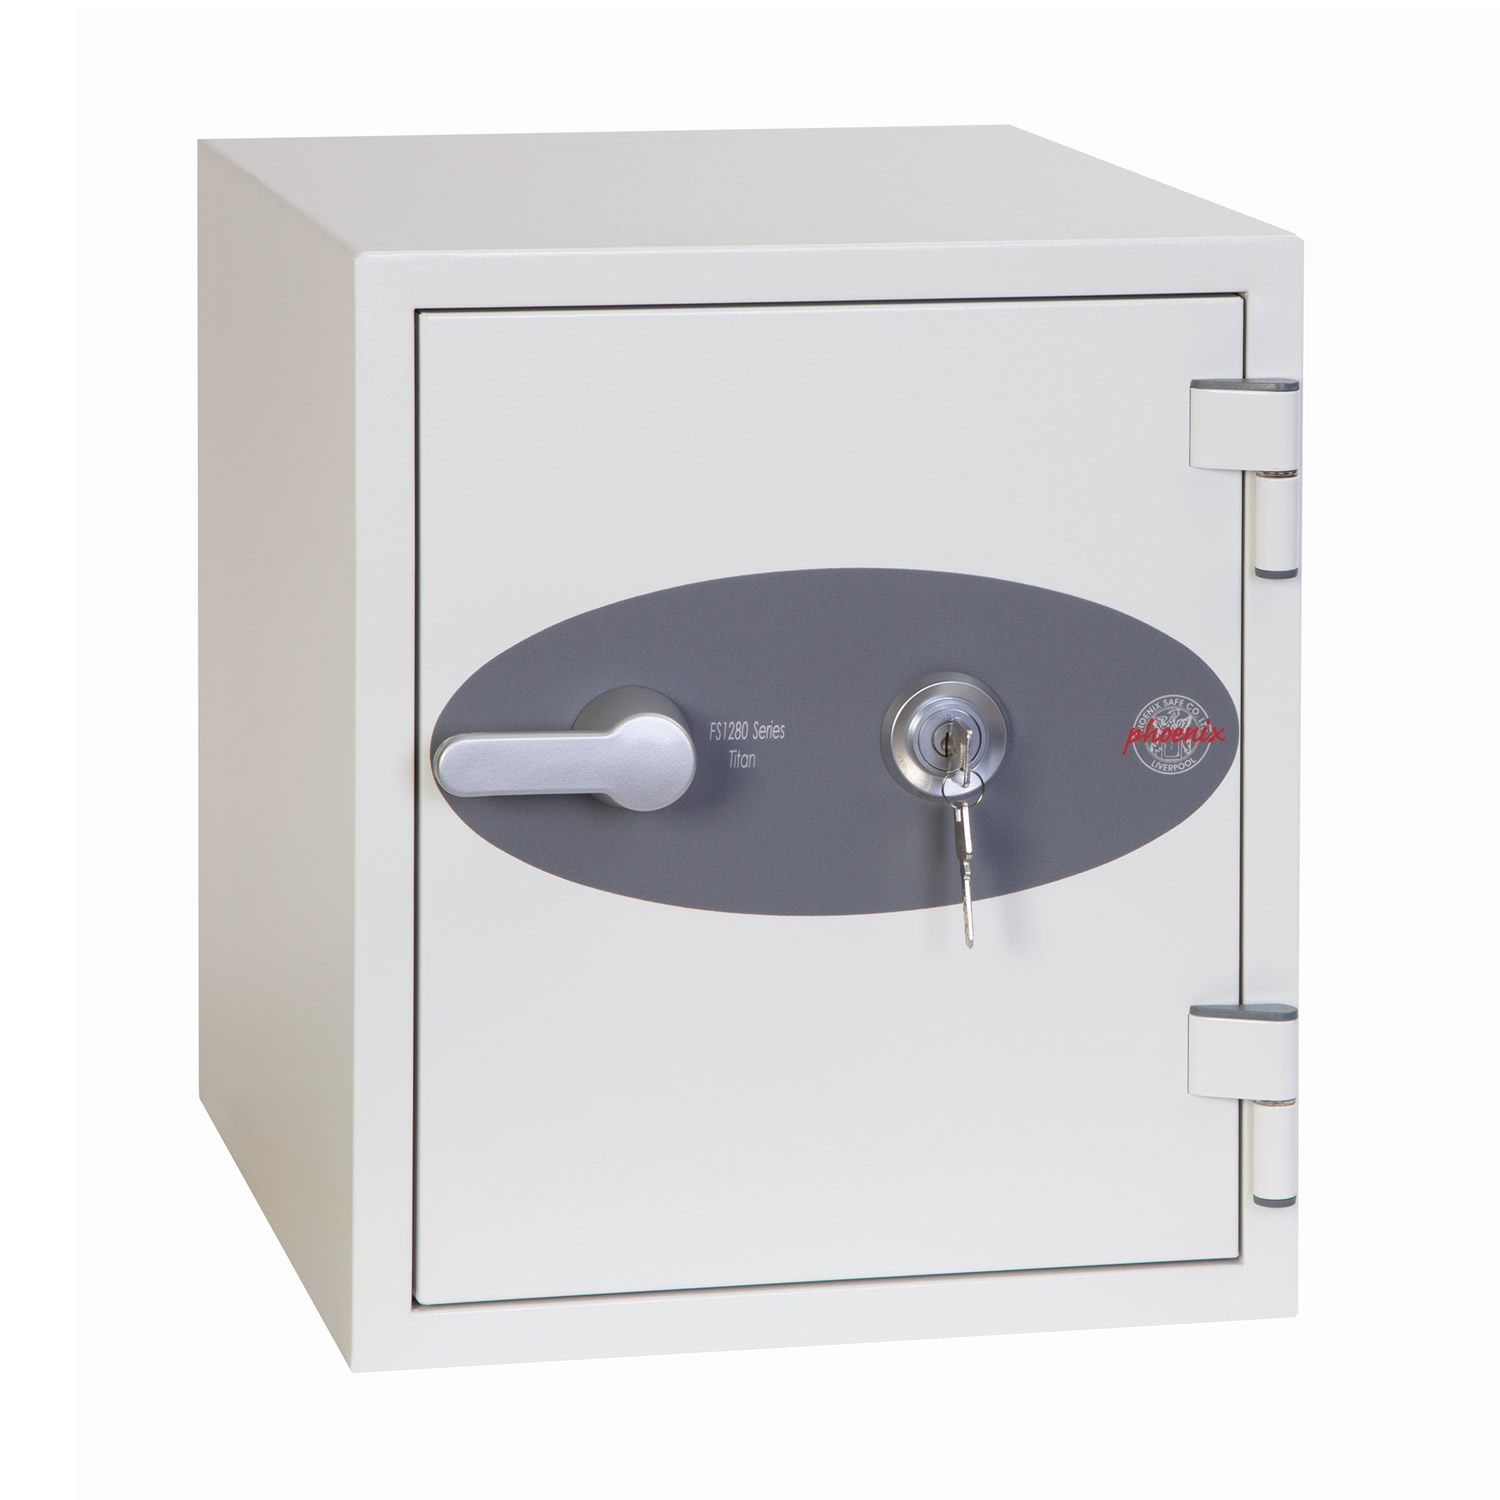 Phoenix Titan 1282 - Fire and Security Safe with Key Lock